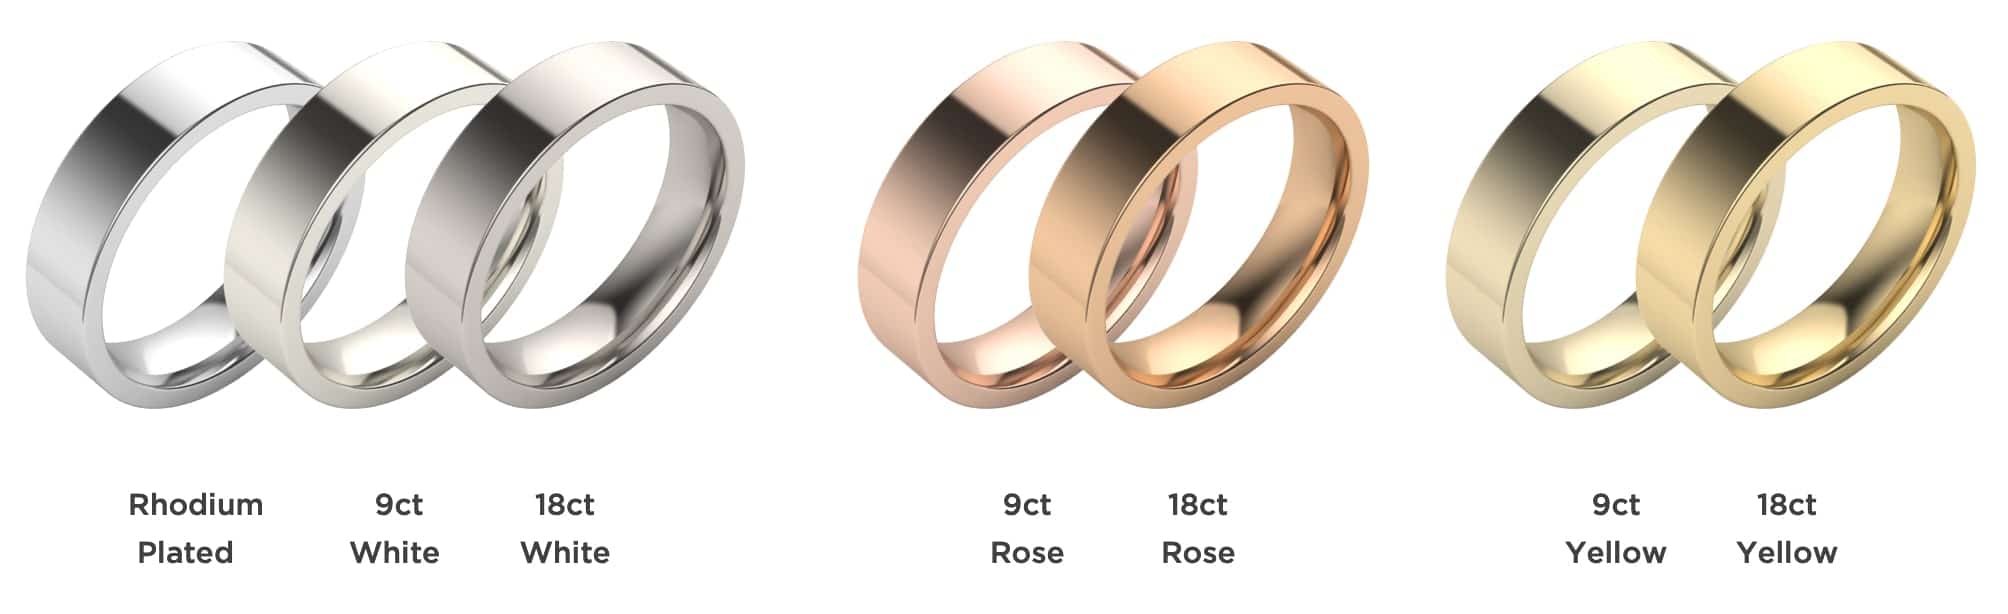 The Facts: 9ct Gold vs 18ct Gold | Is 